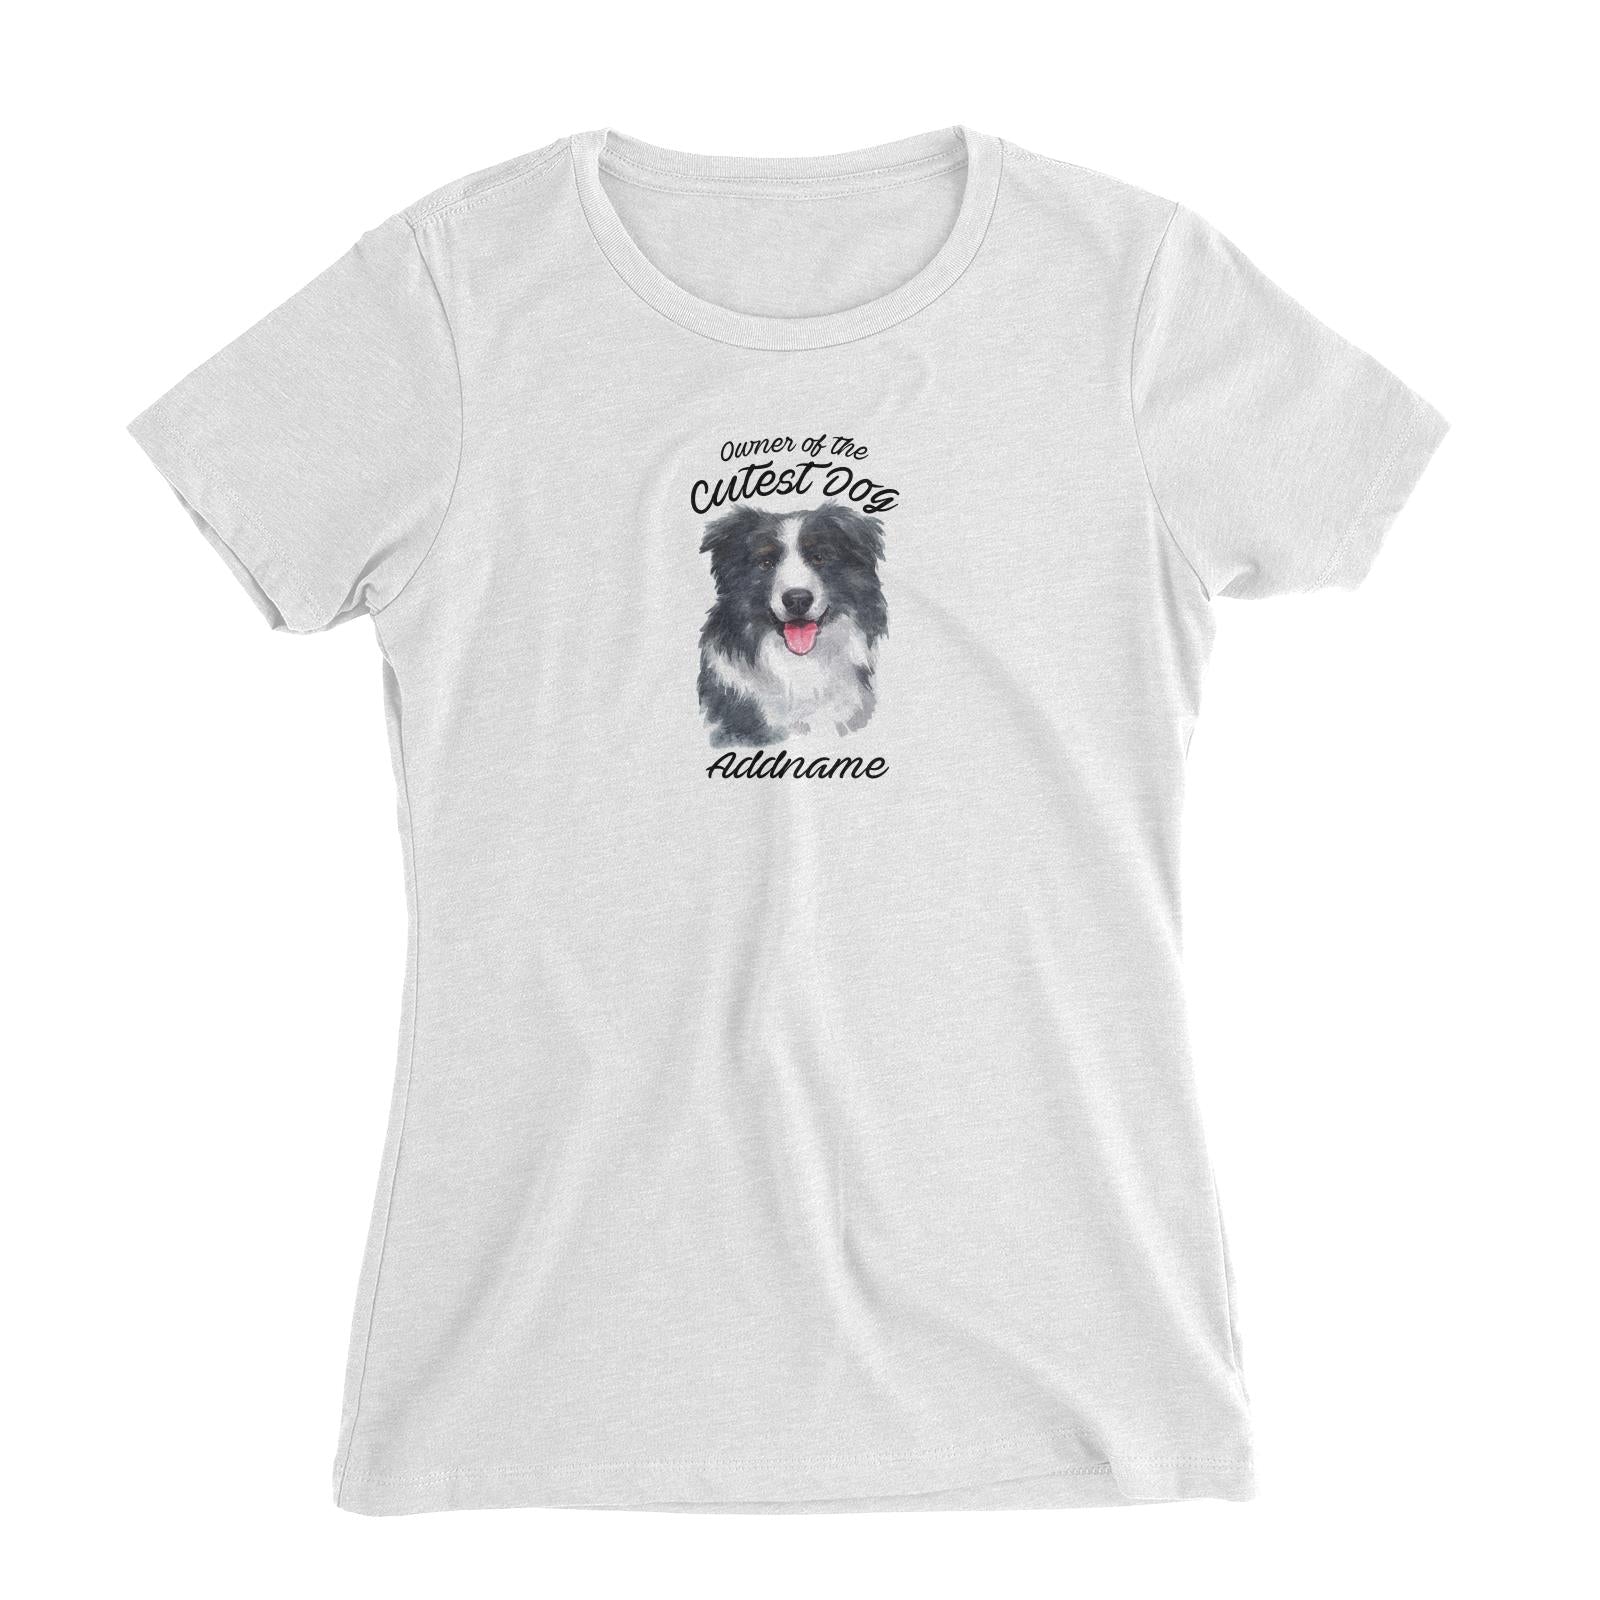 Watercolor Dog Owner Of The Cutest Dog Border Collie Addname Women's Slim Fit T-Shirt